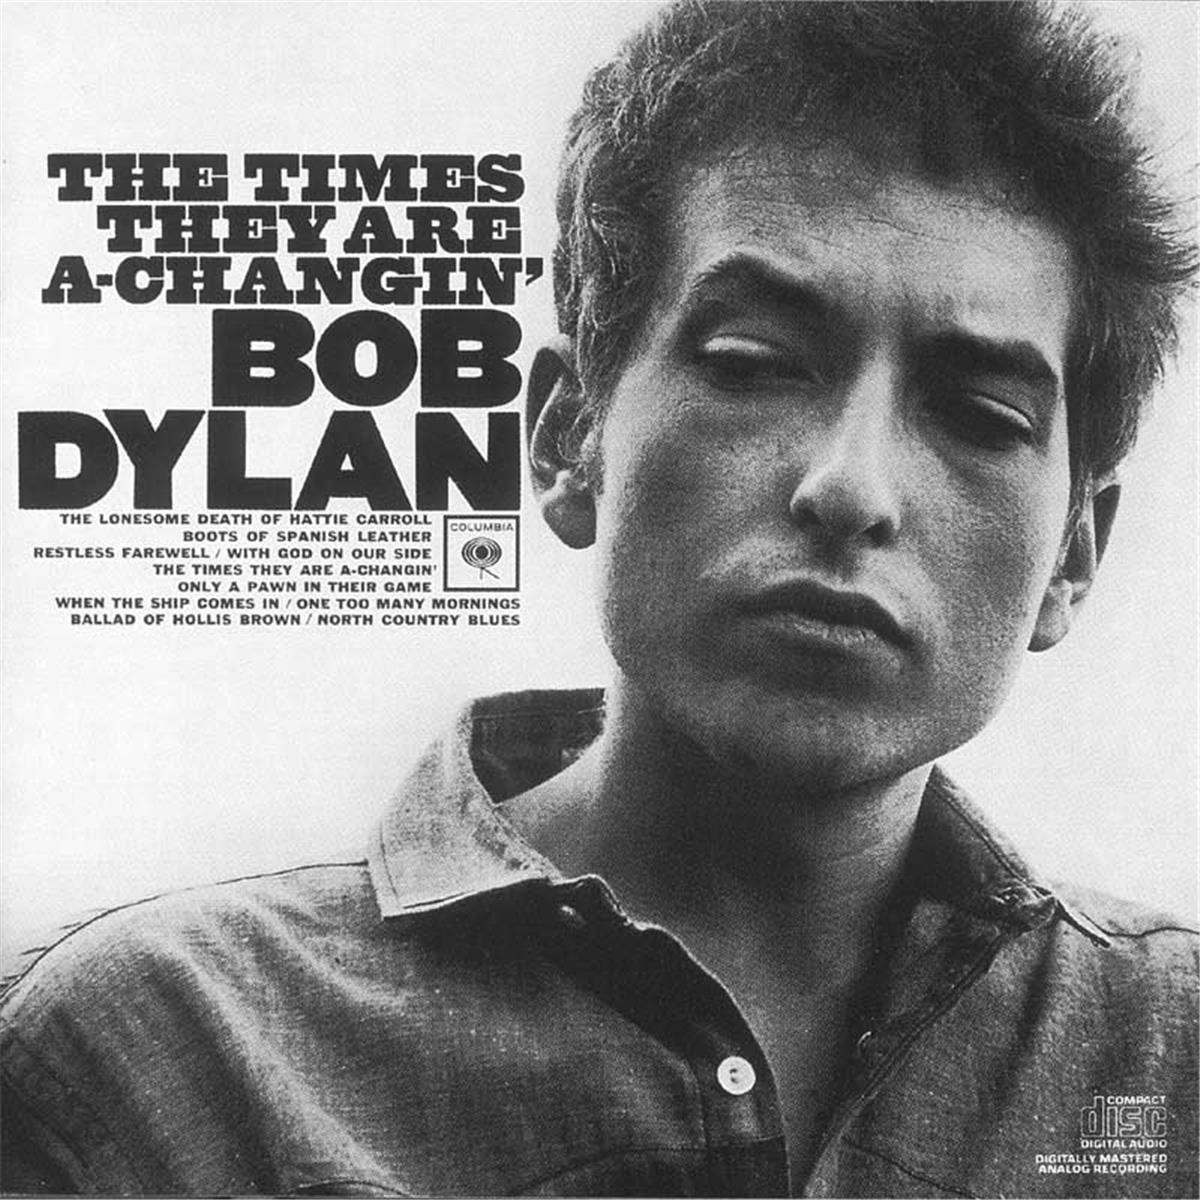 Bob Dylan（“The Times They Are A-Changin”，专辑封面）